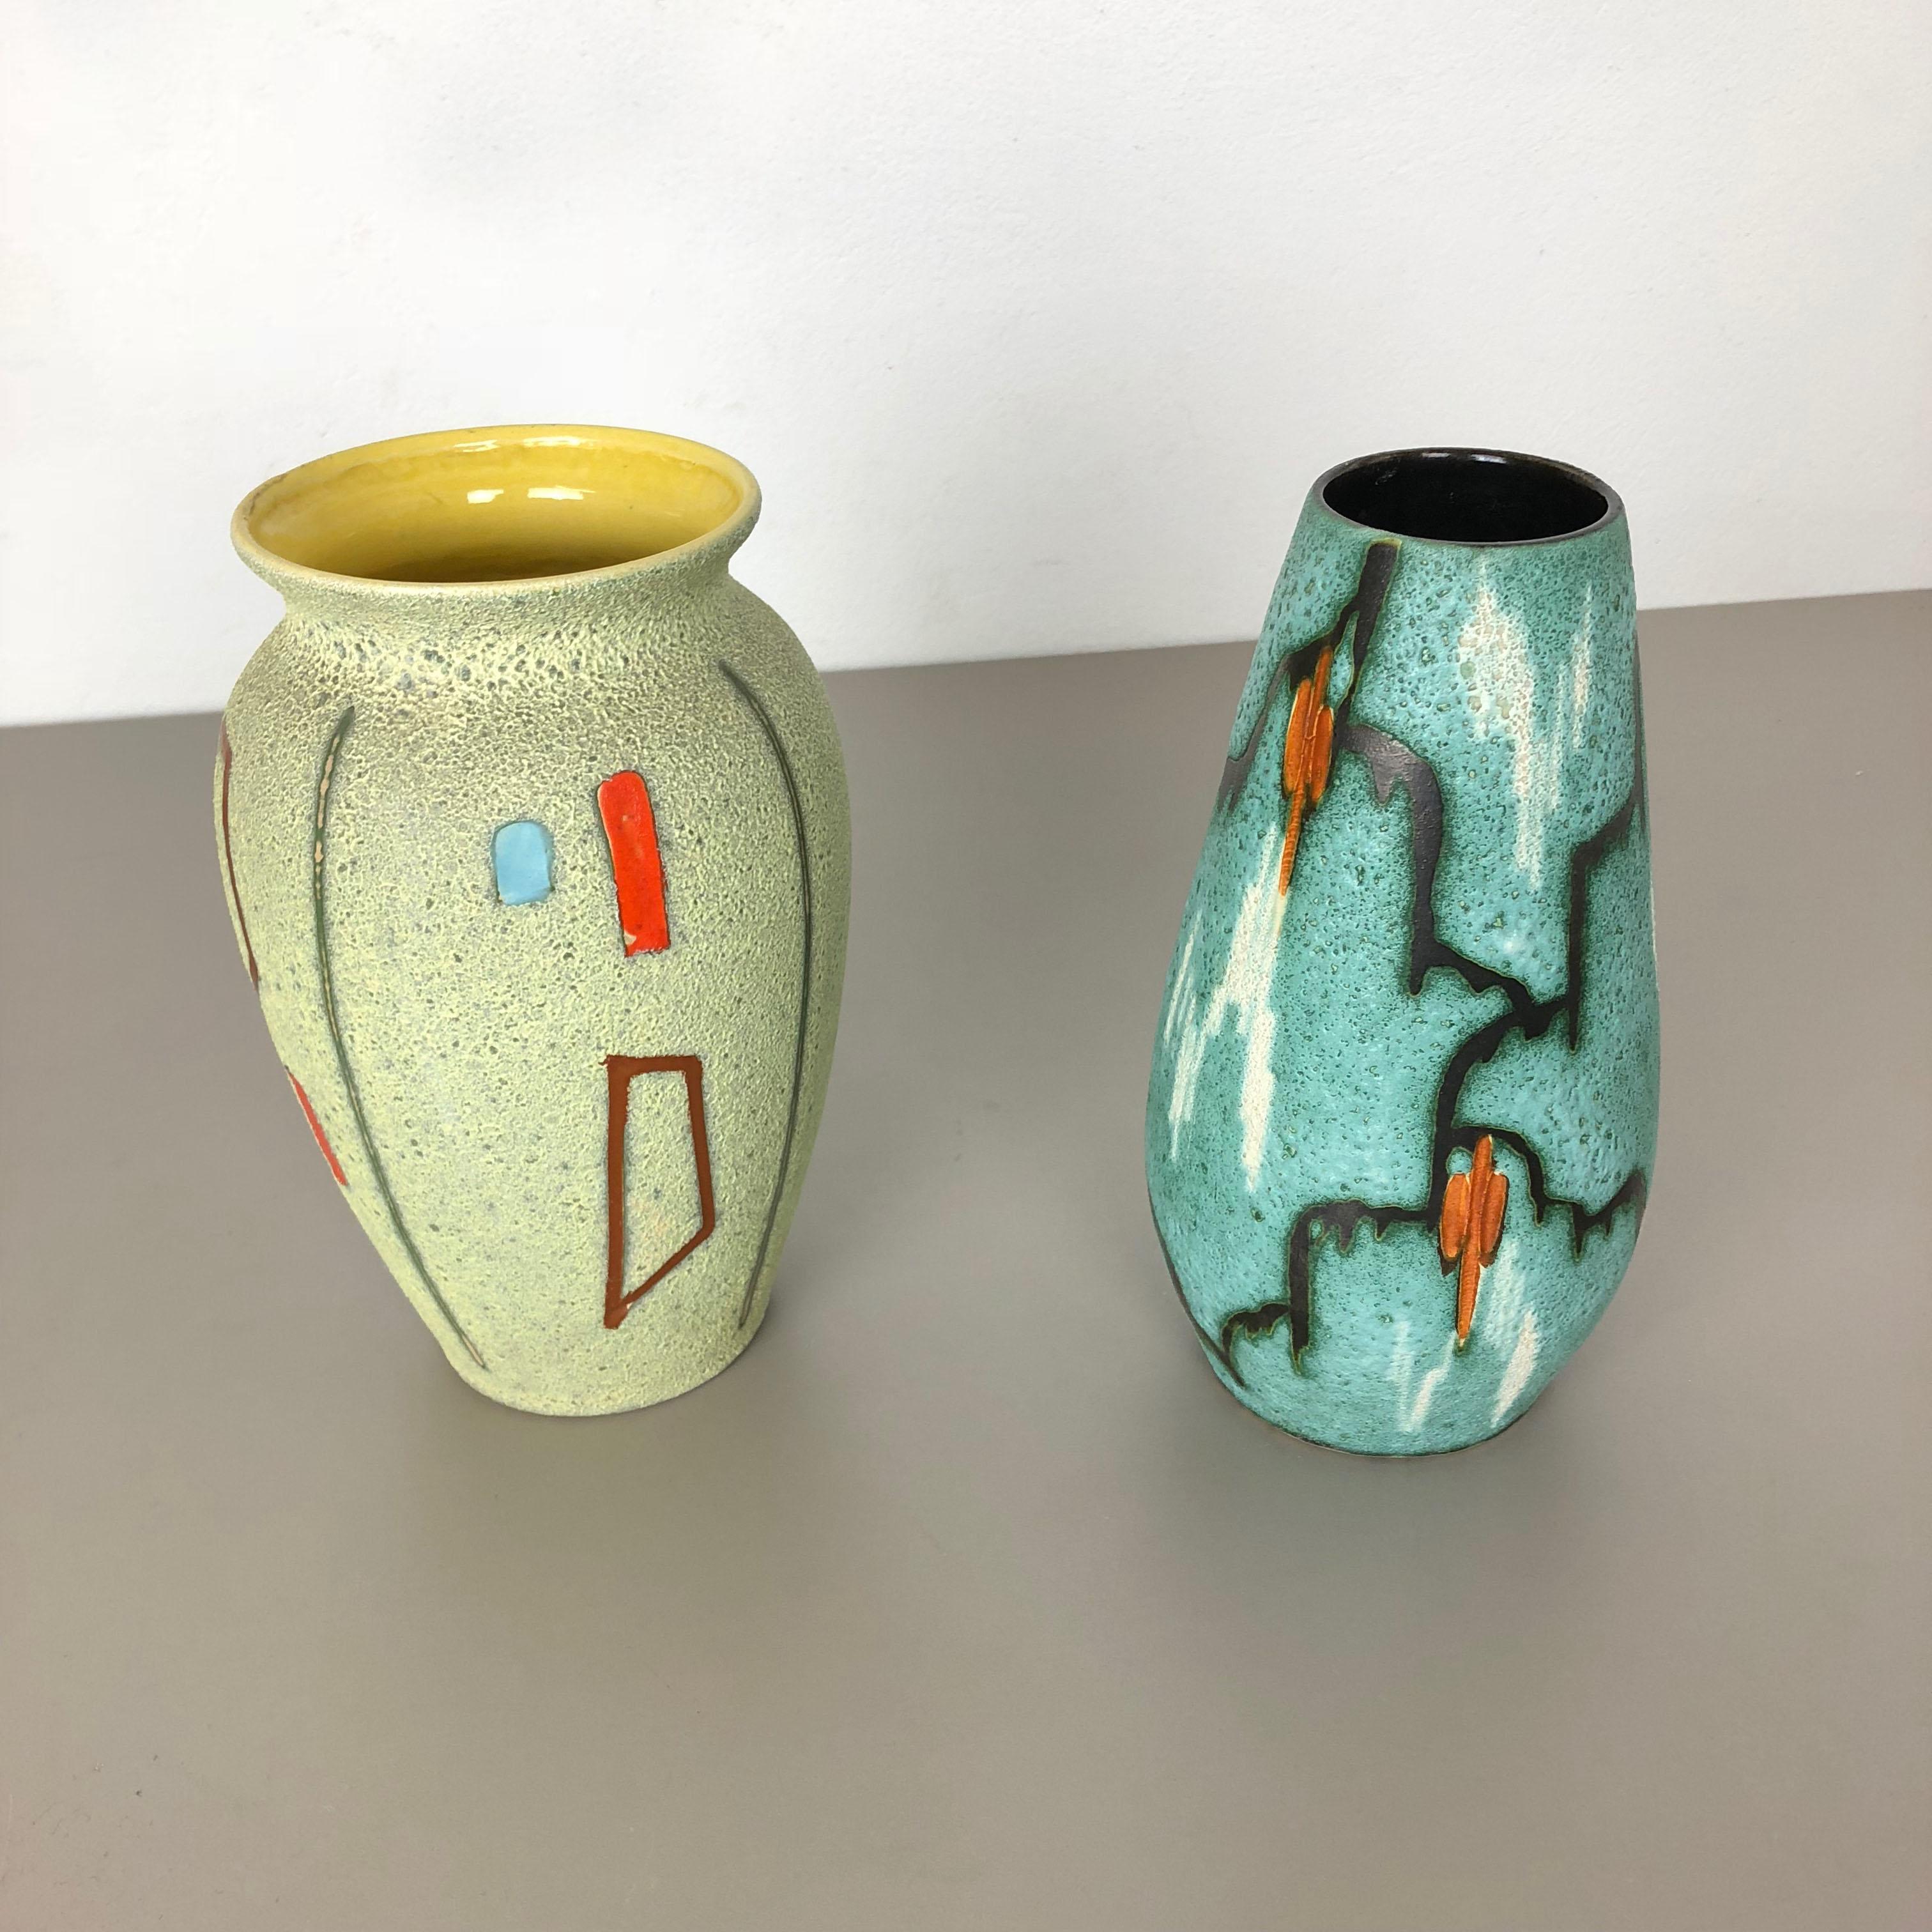 Article:

Set of two abstract colorful vases 



Producer:

Scheurich, Germany



Decade:

1960s


These original vintage vases was produced in the 1960s in Germany. It is made of ceramic pottery with abstract illustration, typical